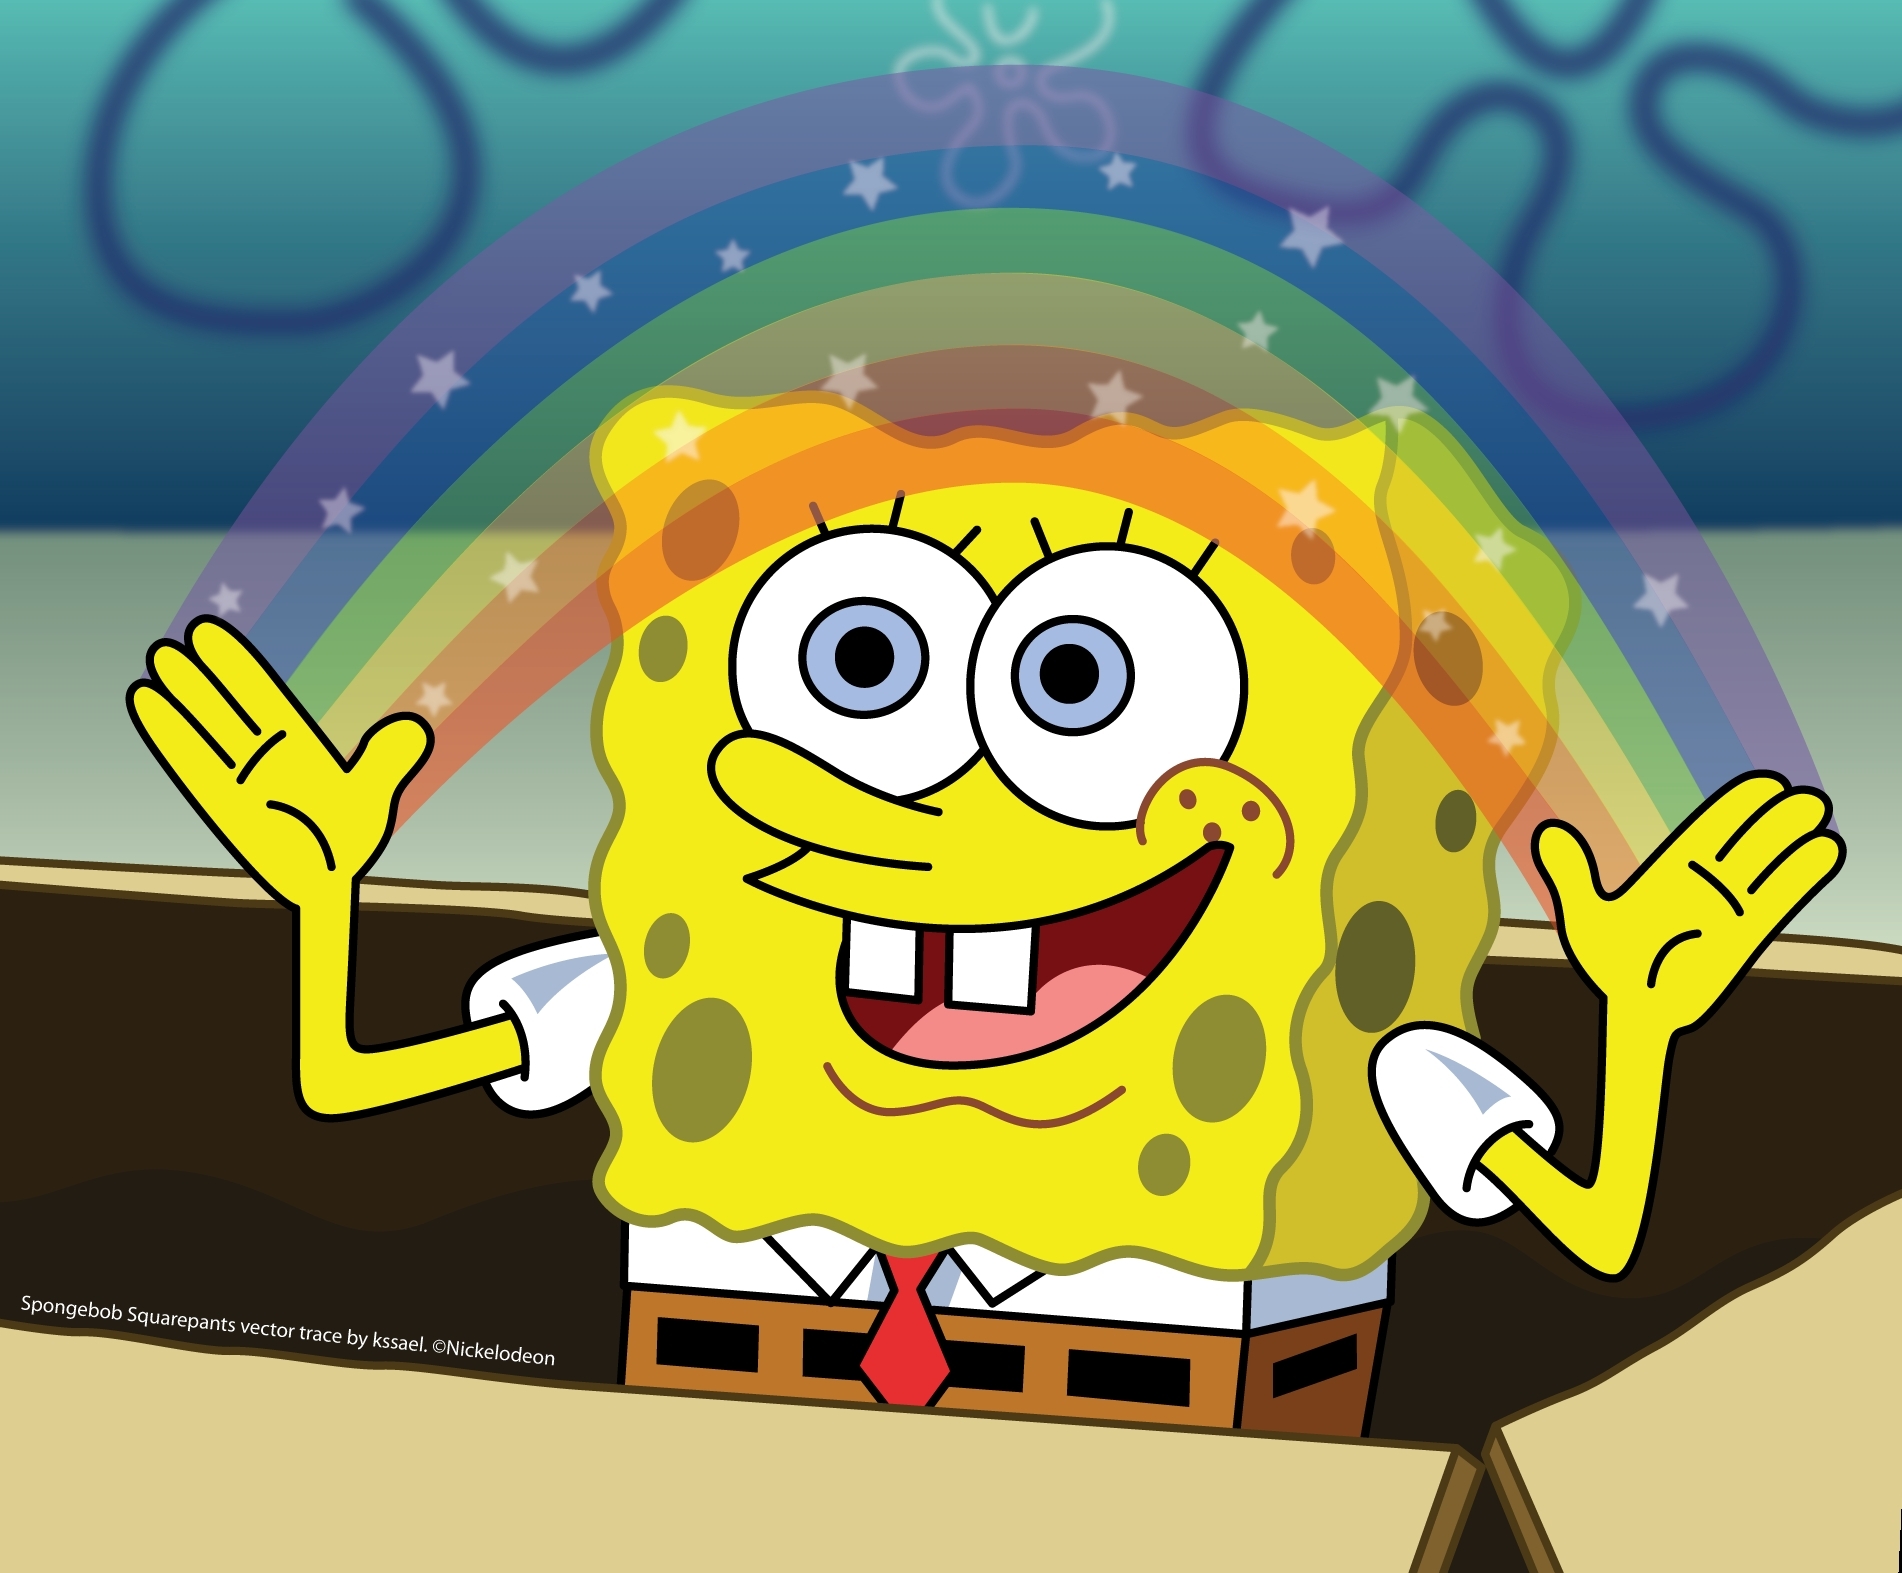 Fun Facts 10 Things You Probably Didnt Know About SpongeBob